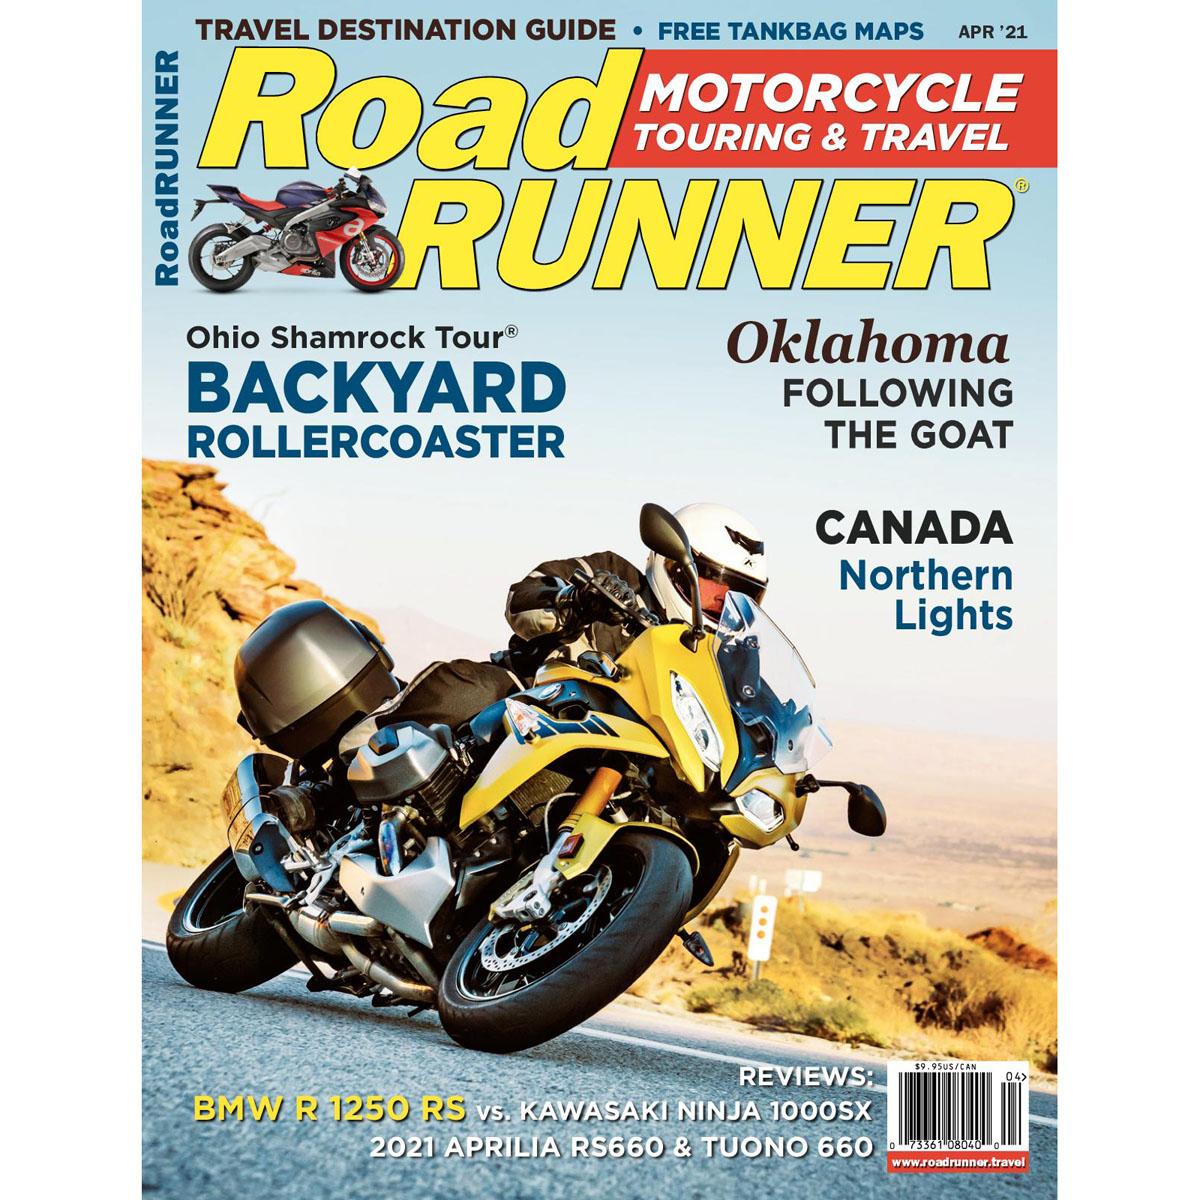 RoadRUNNER Motorcycle Touring and Travel Magazine Subscription for Free